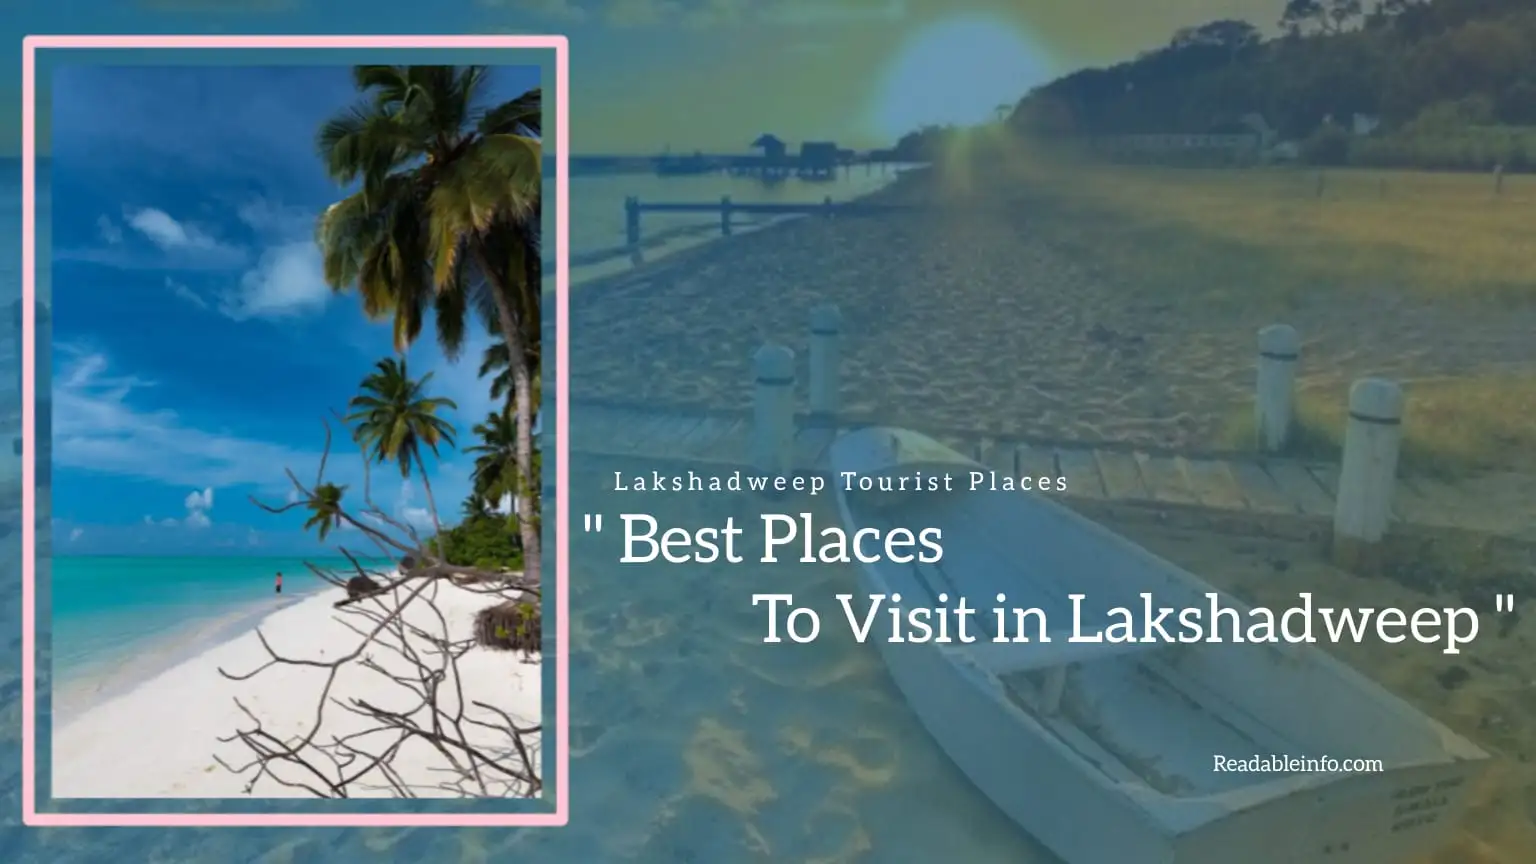 You are currently viewing Best Places To Visit in Lakshadweep (Lakshadweep Tourist Places)